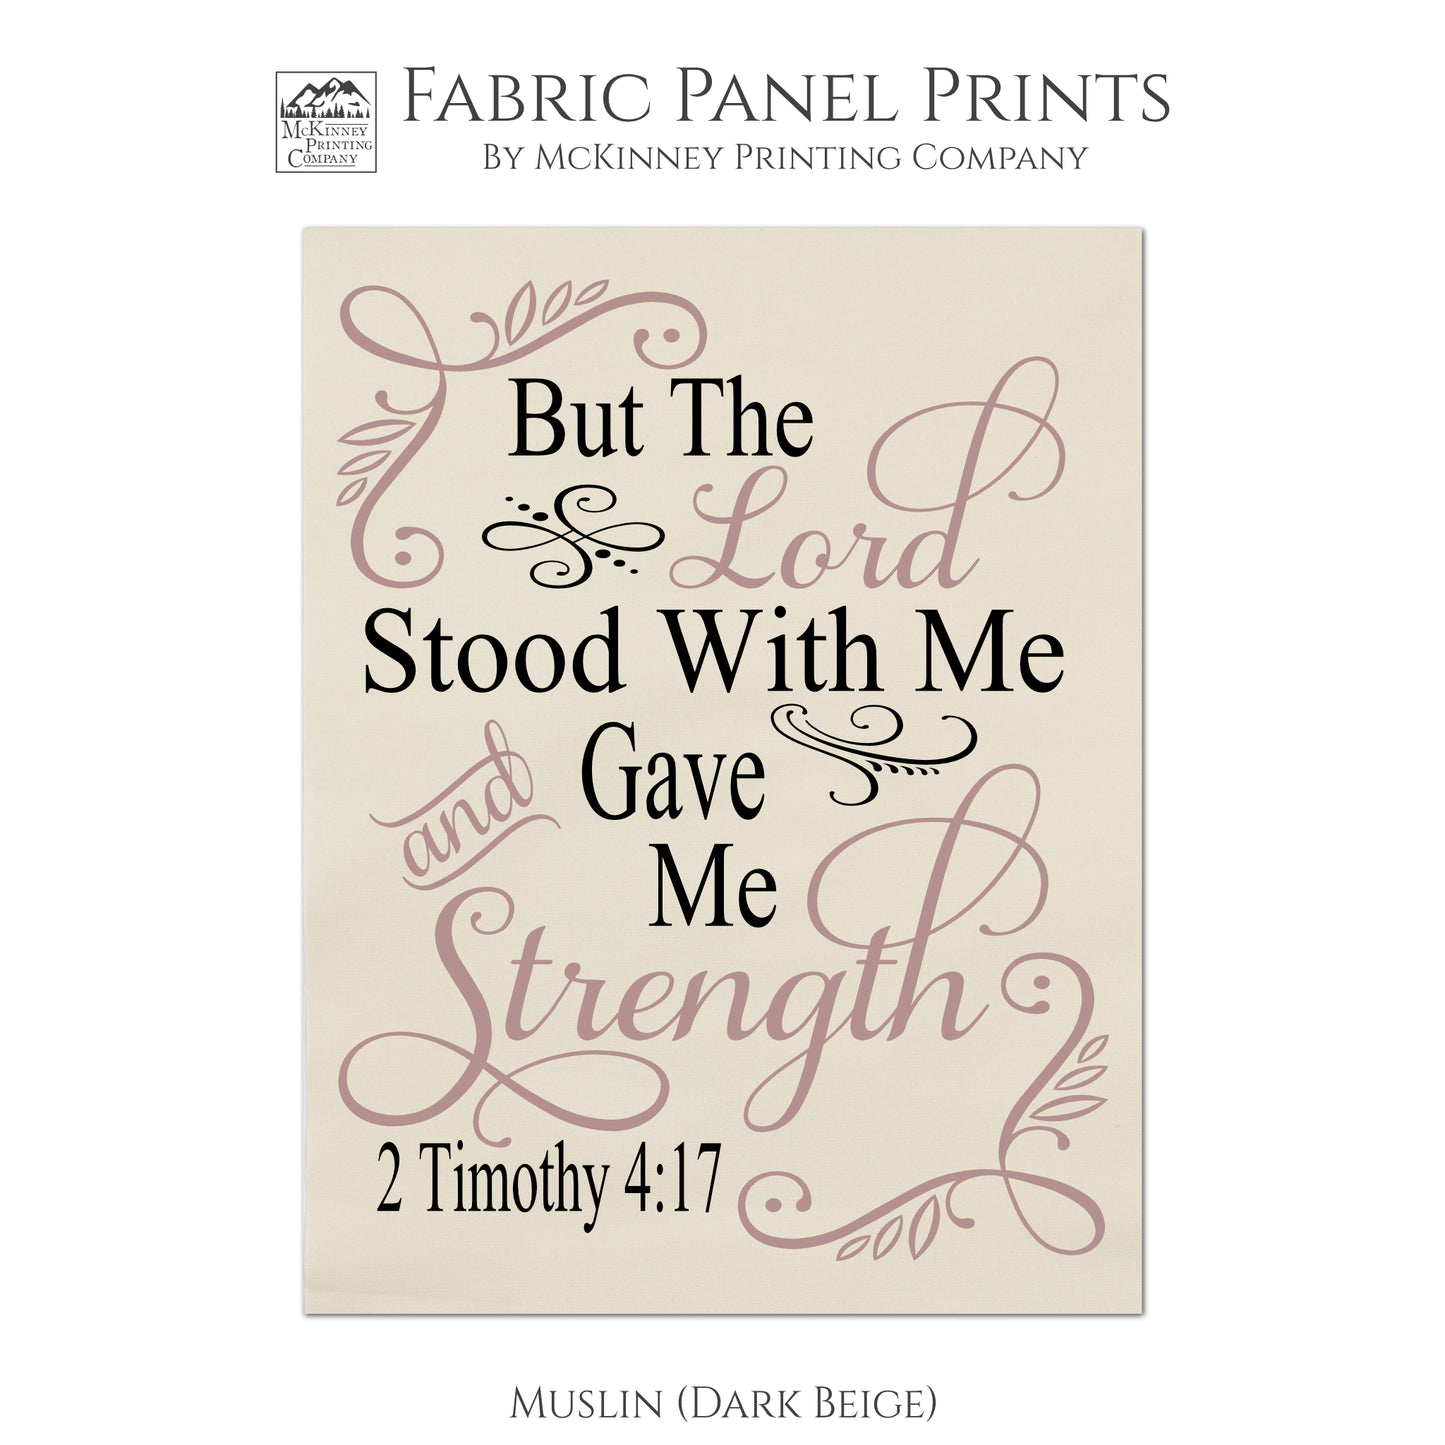 2 Timothy 4:17, But the Lord Stood With Me and Gave Me Strength